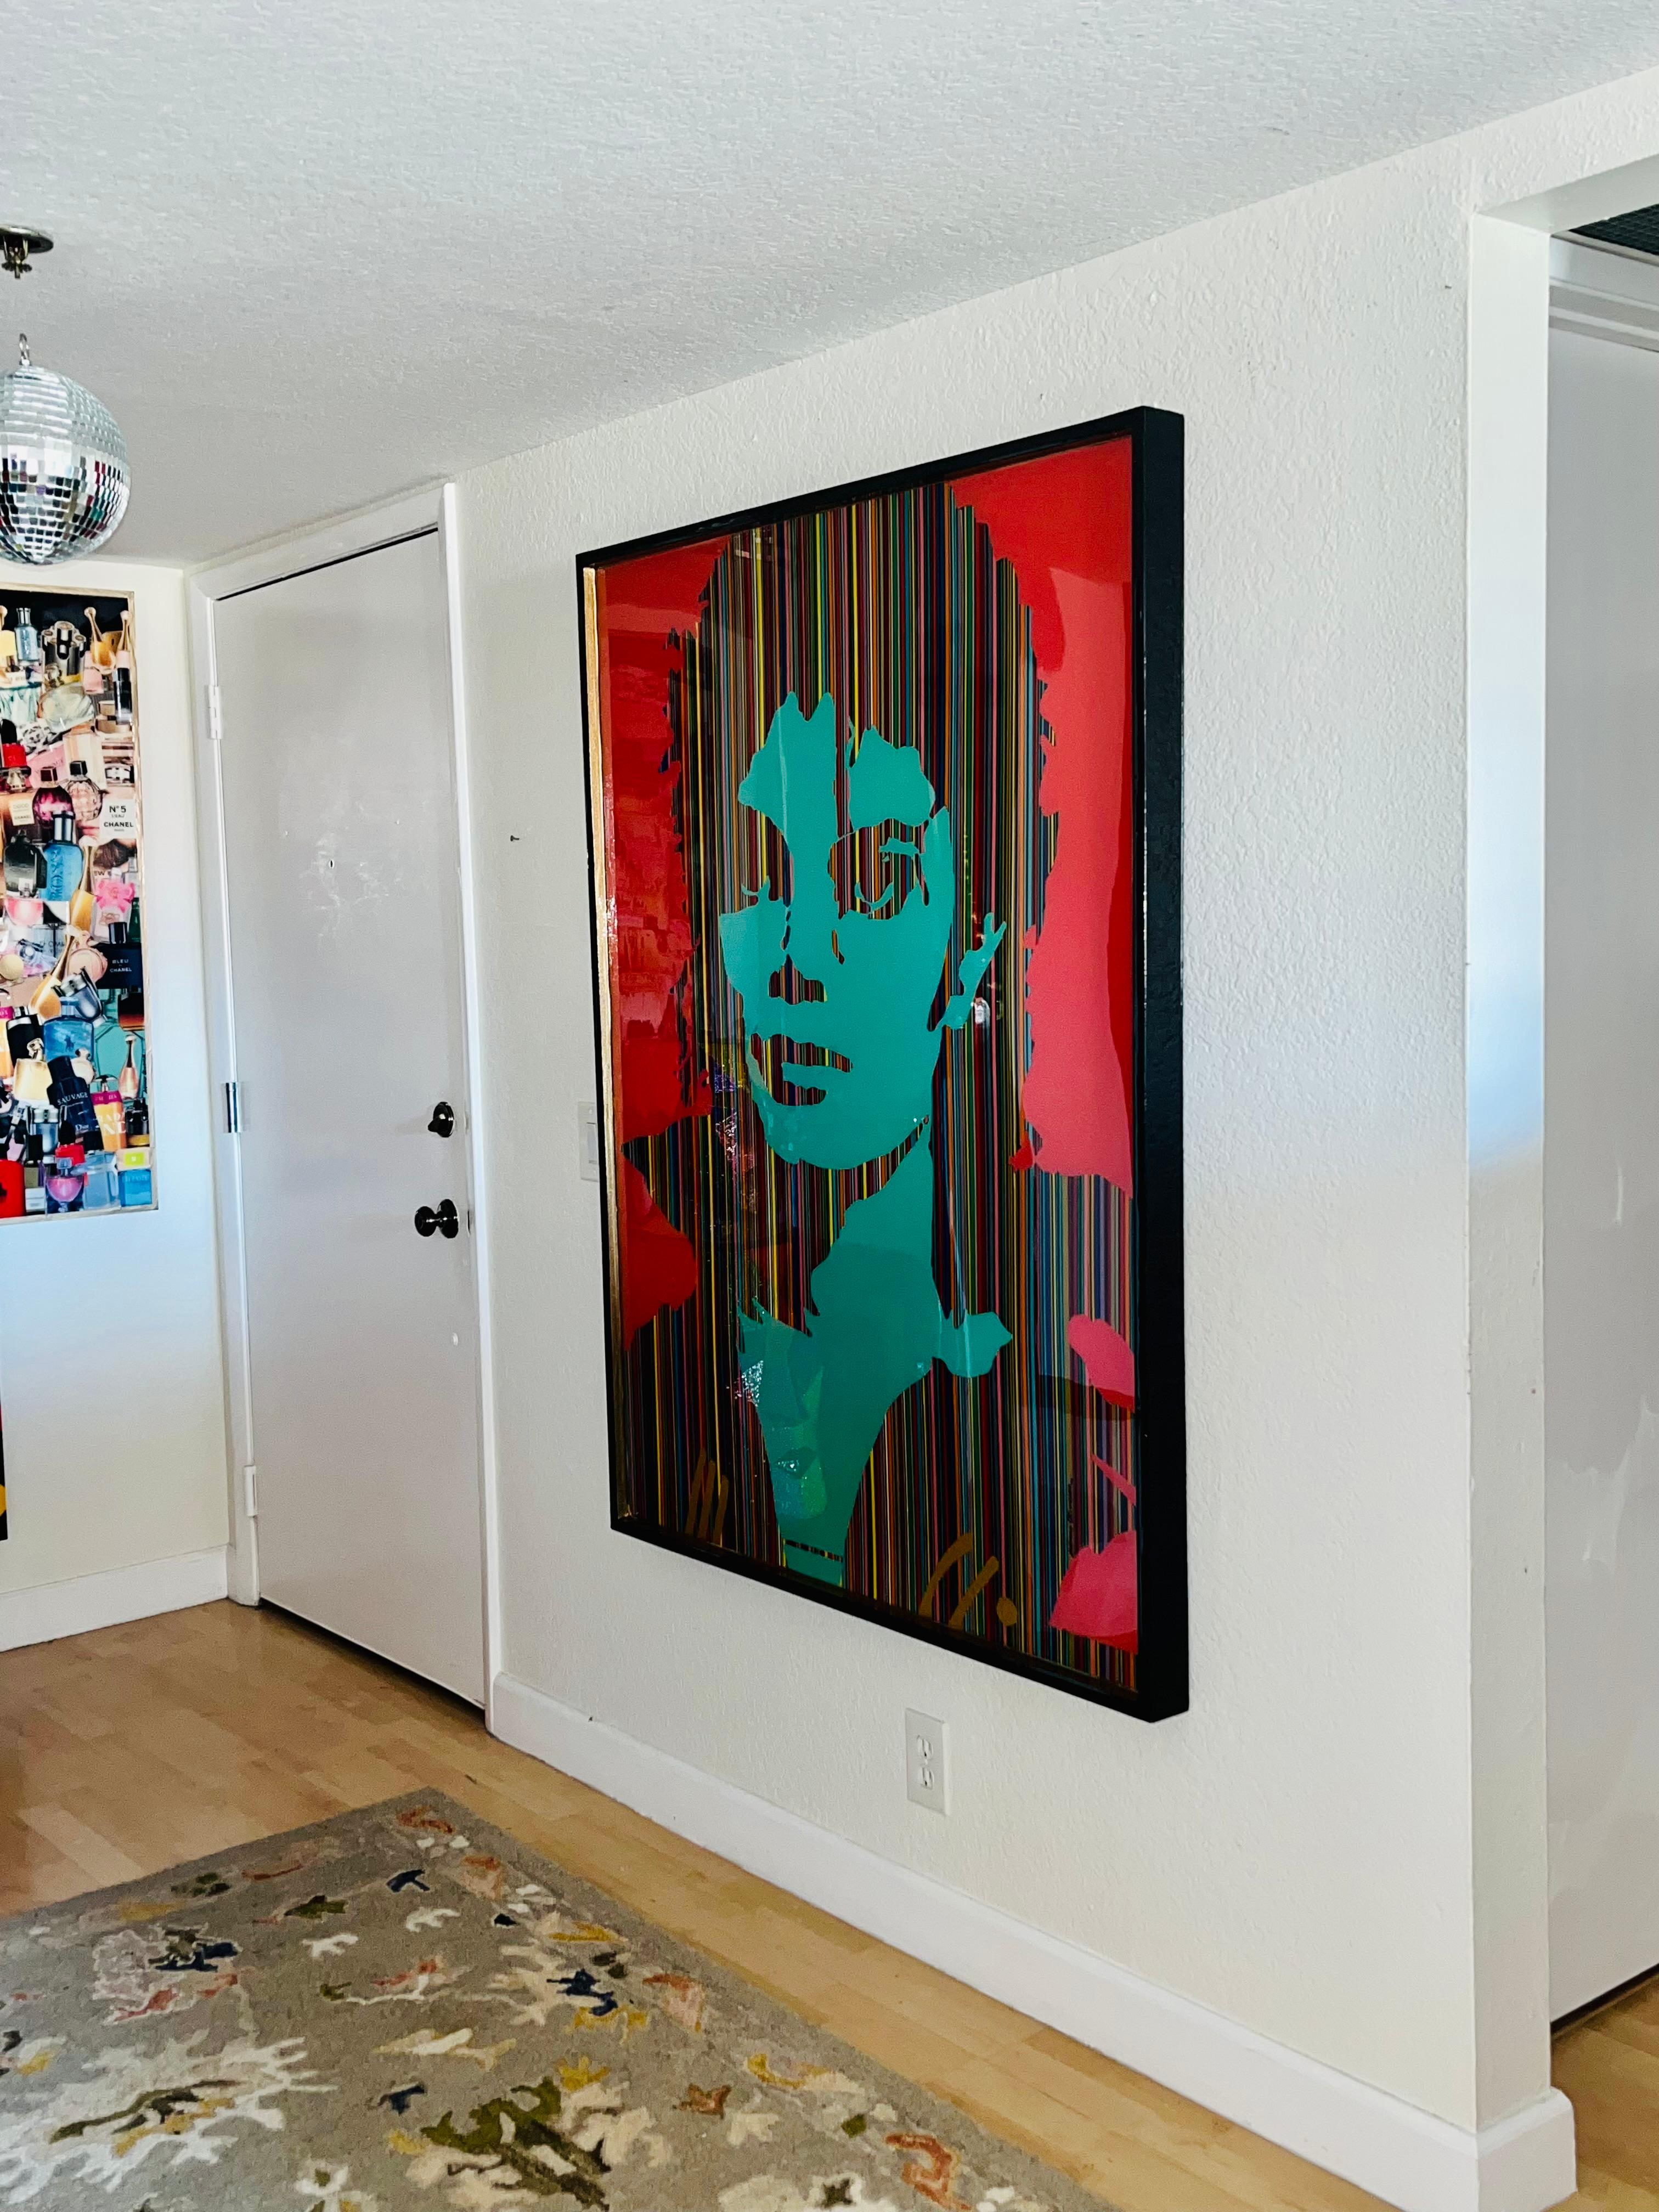                **ANNUAL SUPER SALE UNTIL MAY 15th ONLY**
*This Price Won't Be Repeated Again This Year - Take Advantage Of It*

King of Pop II by Mauro Oliveira, signed. 

Celebrating the King of Pop Michael Jackson with this very special piece.